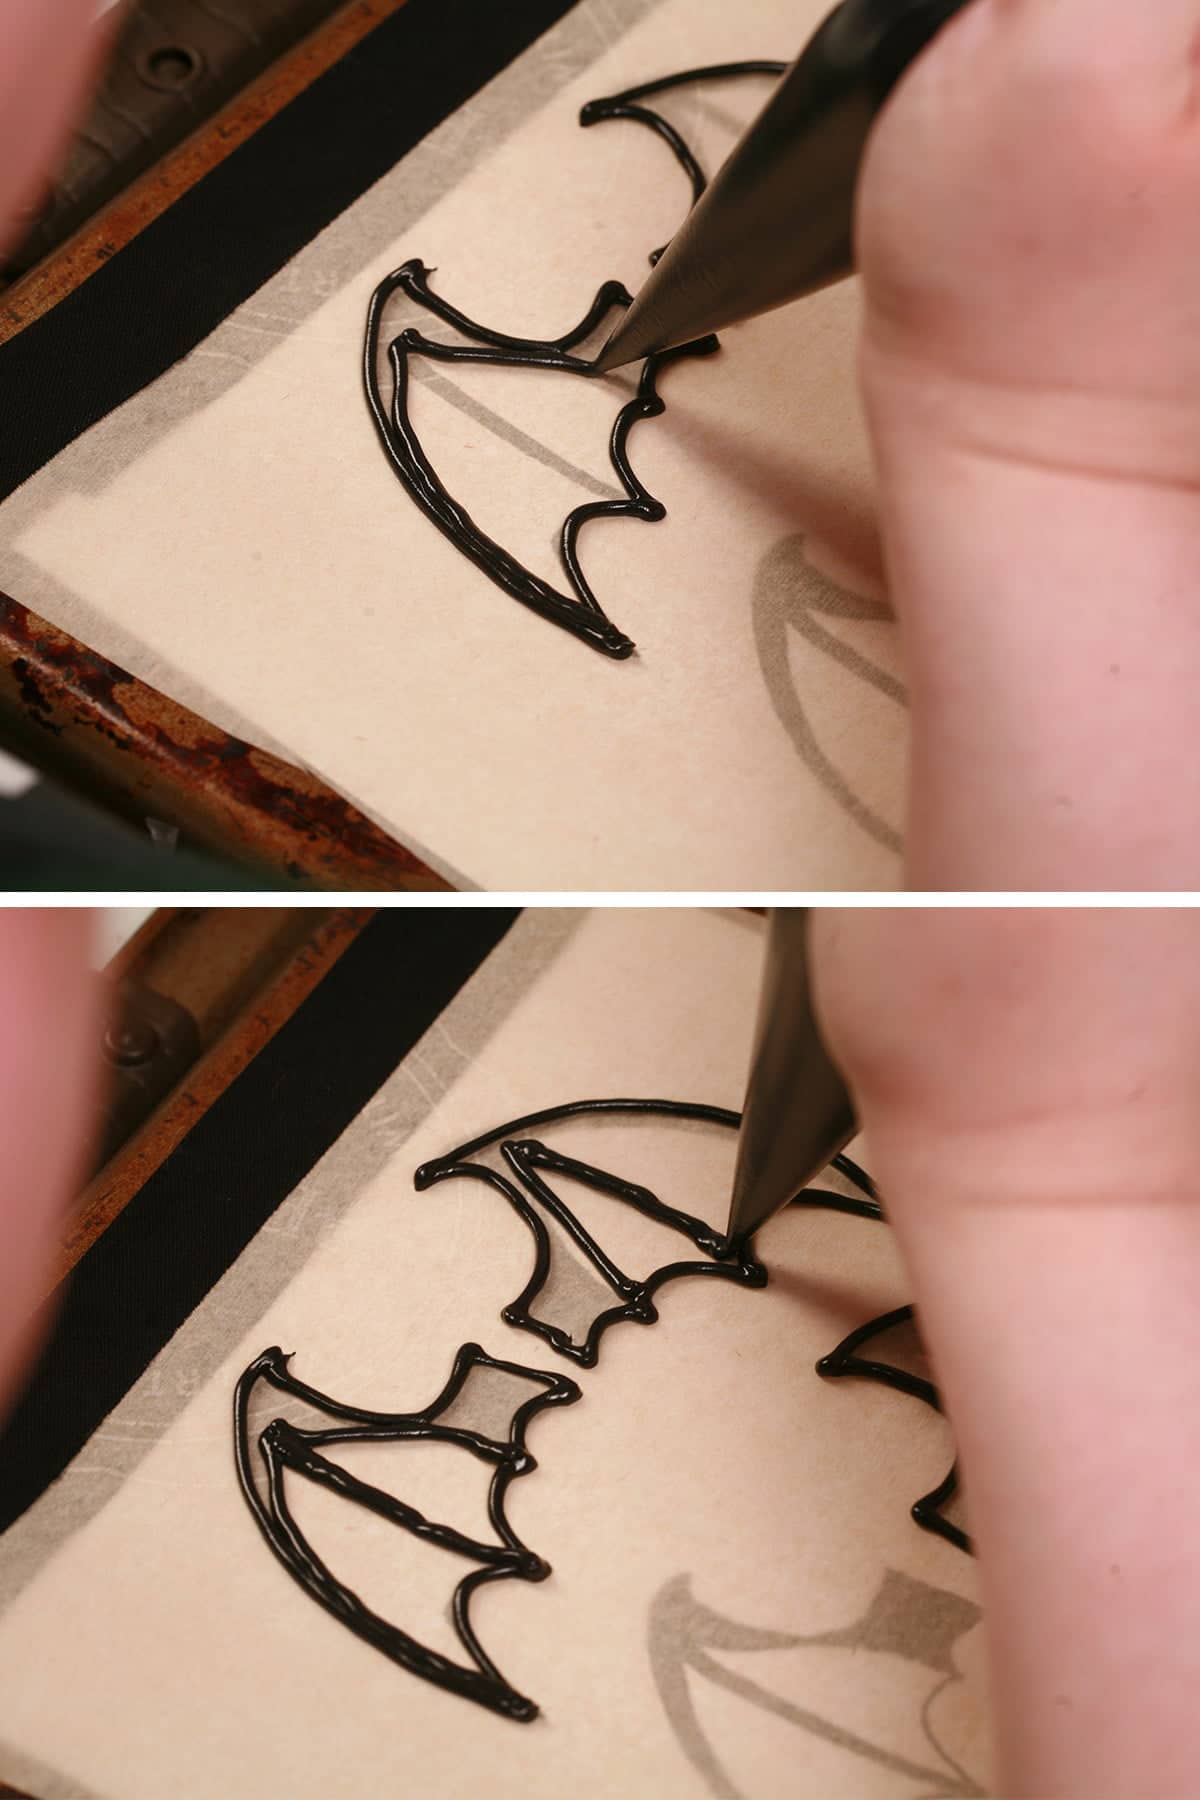 A hand uses a pastry bag of black royal icing to pipe bat wings on a parchment lined baking sheet.